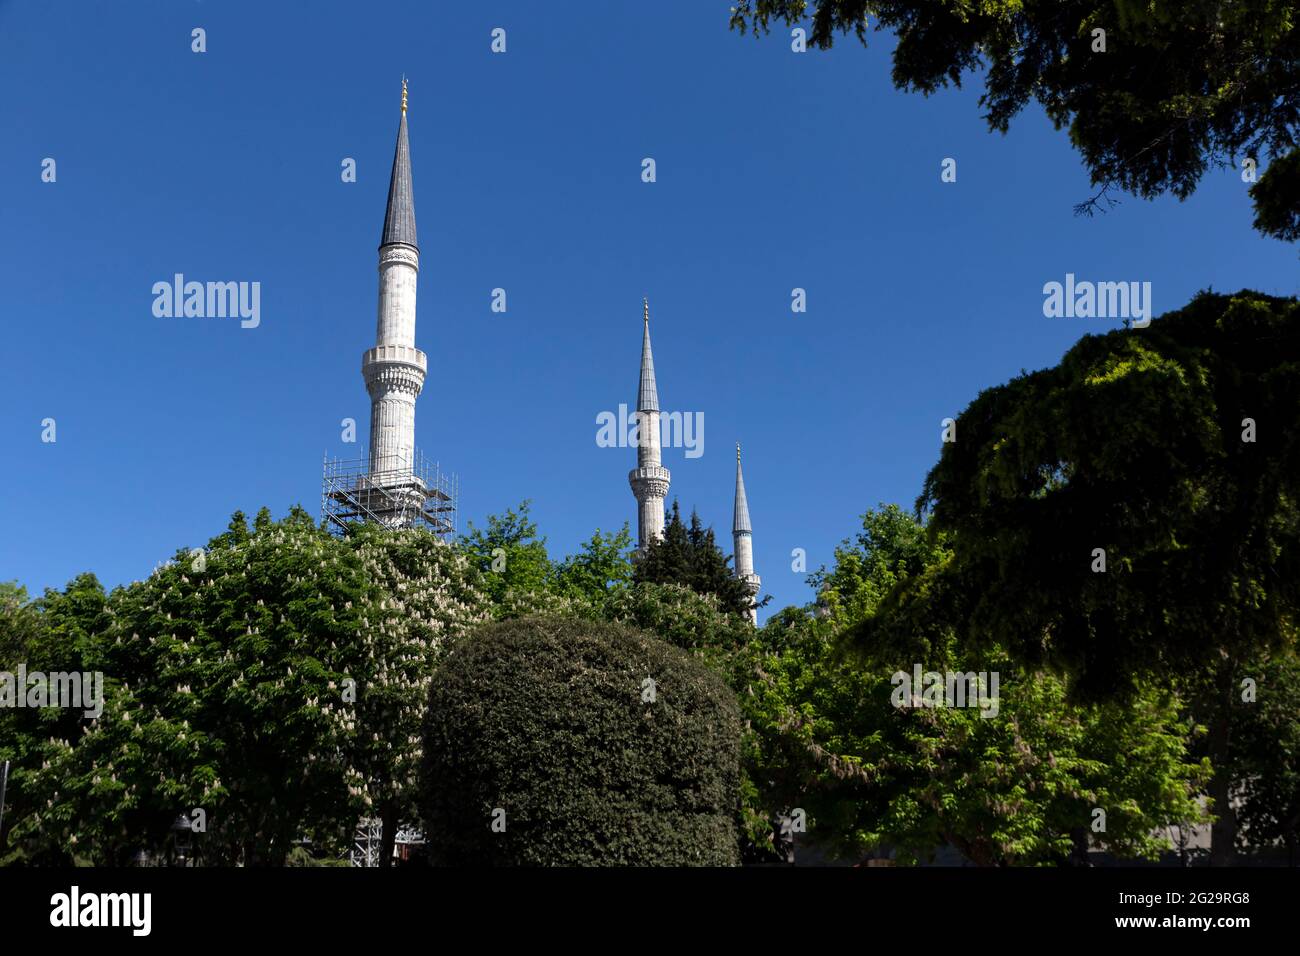 Landscape image of three minarets, one under repair, seen among trees under blue sky. Stock Photo